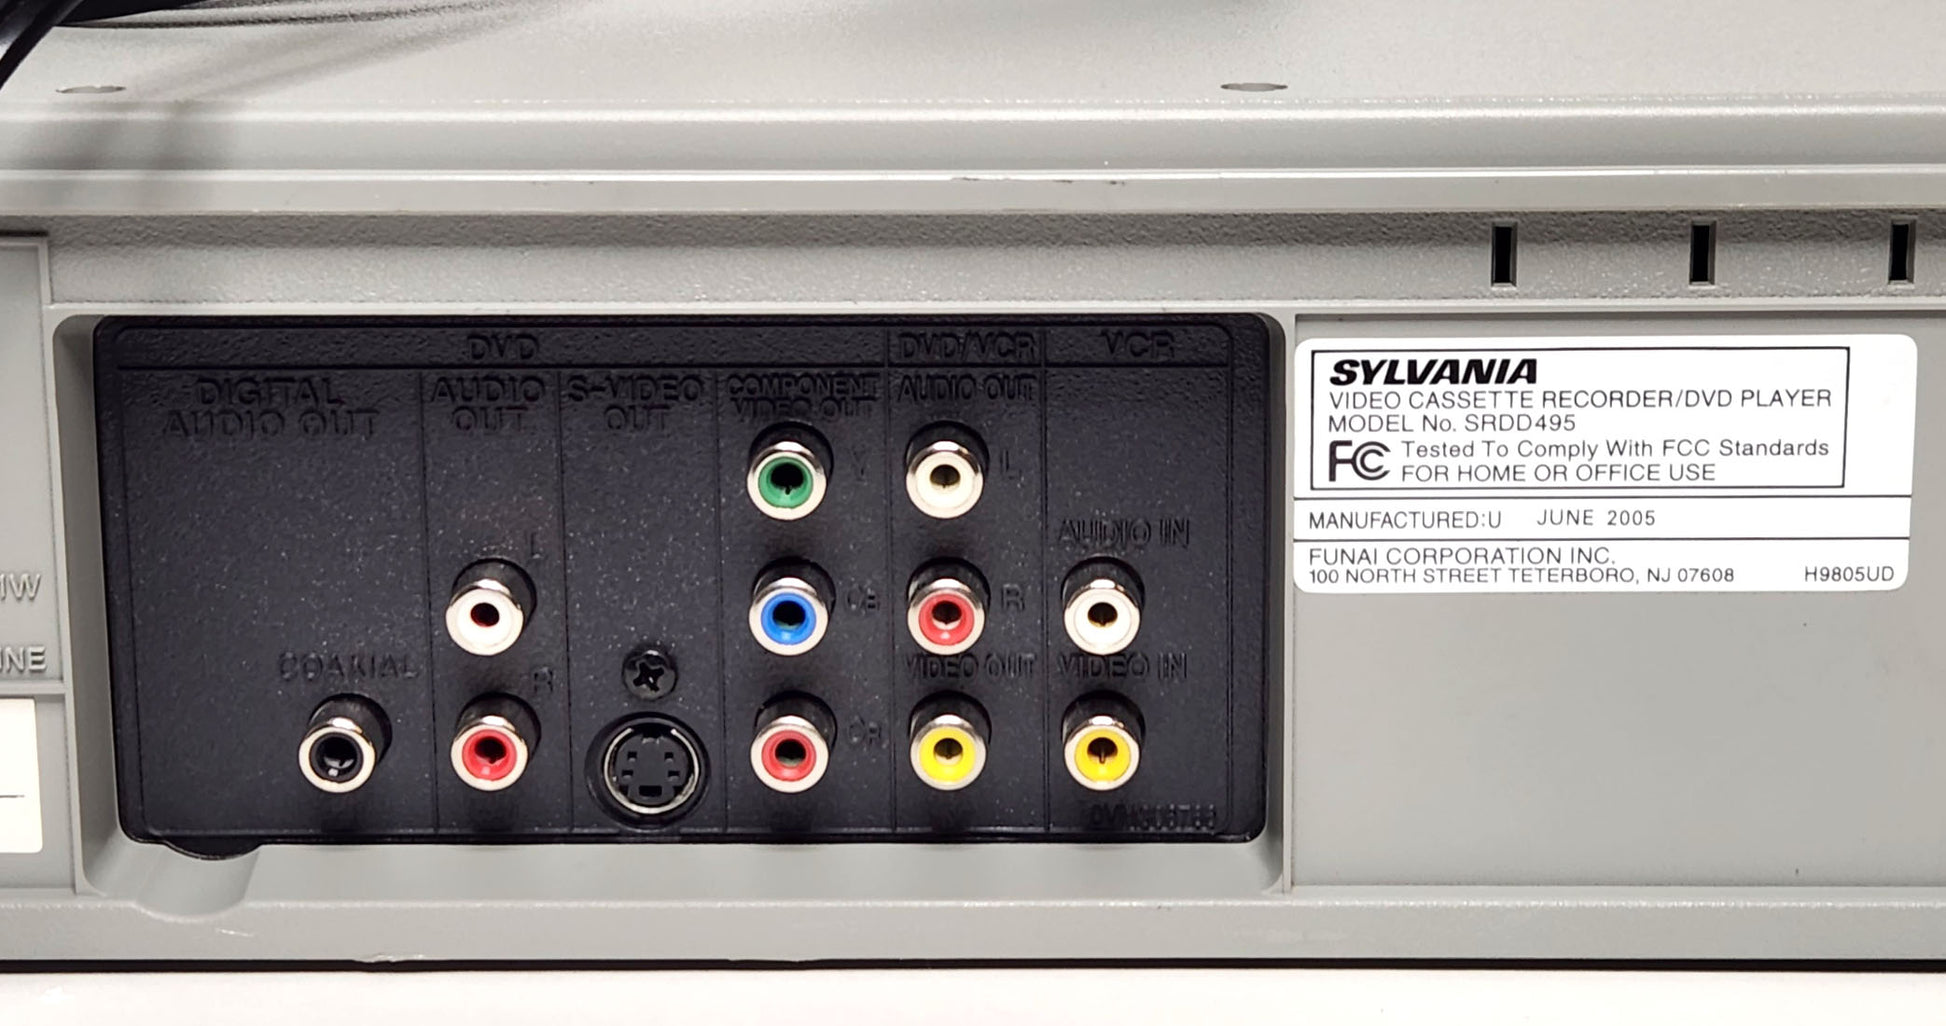 Sylvania SRDD495 VCR/DVD Player Combo - Connections and Label